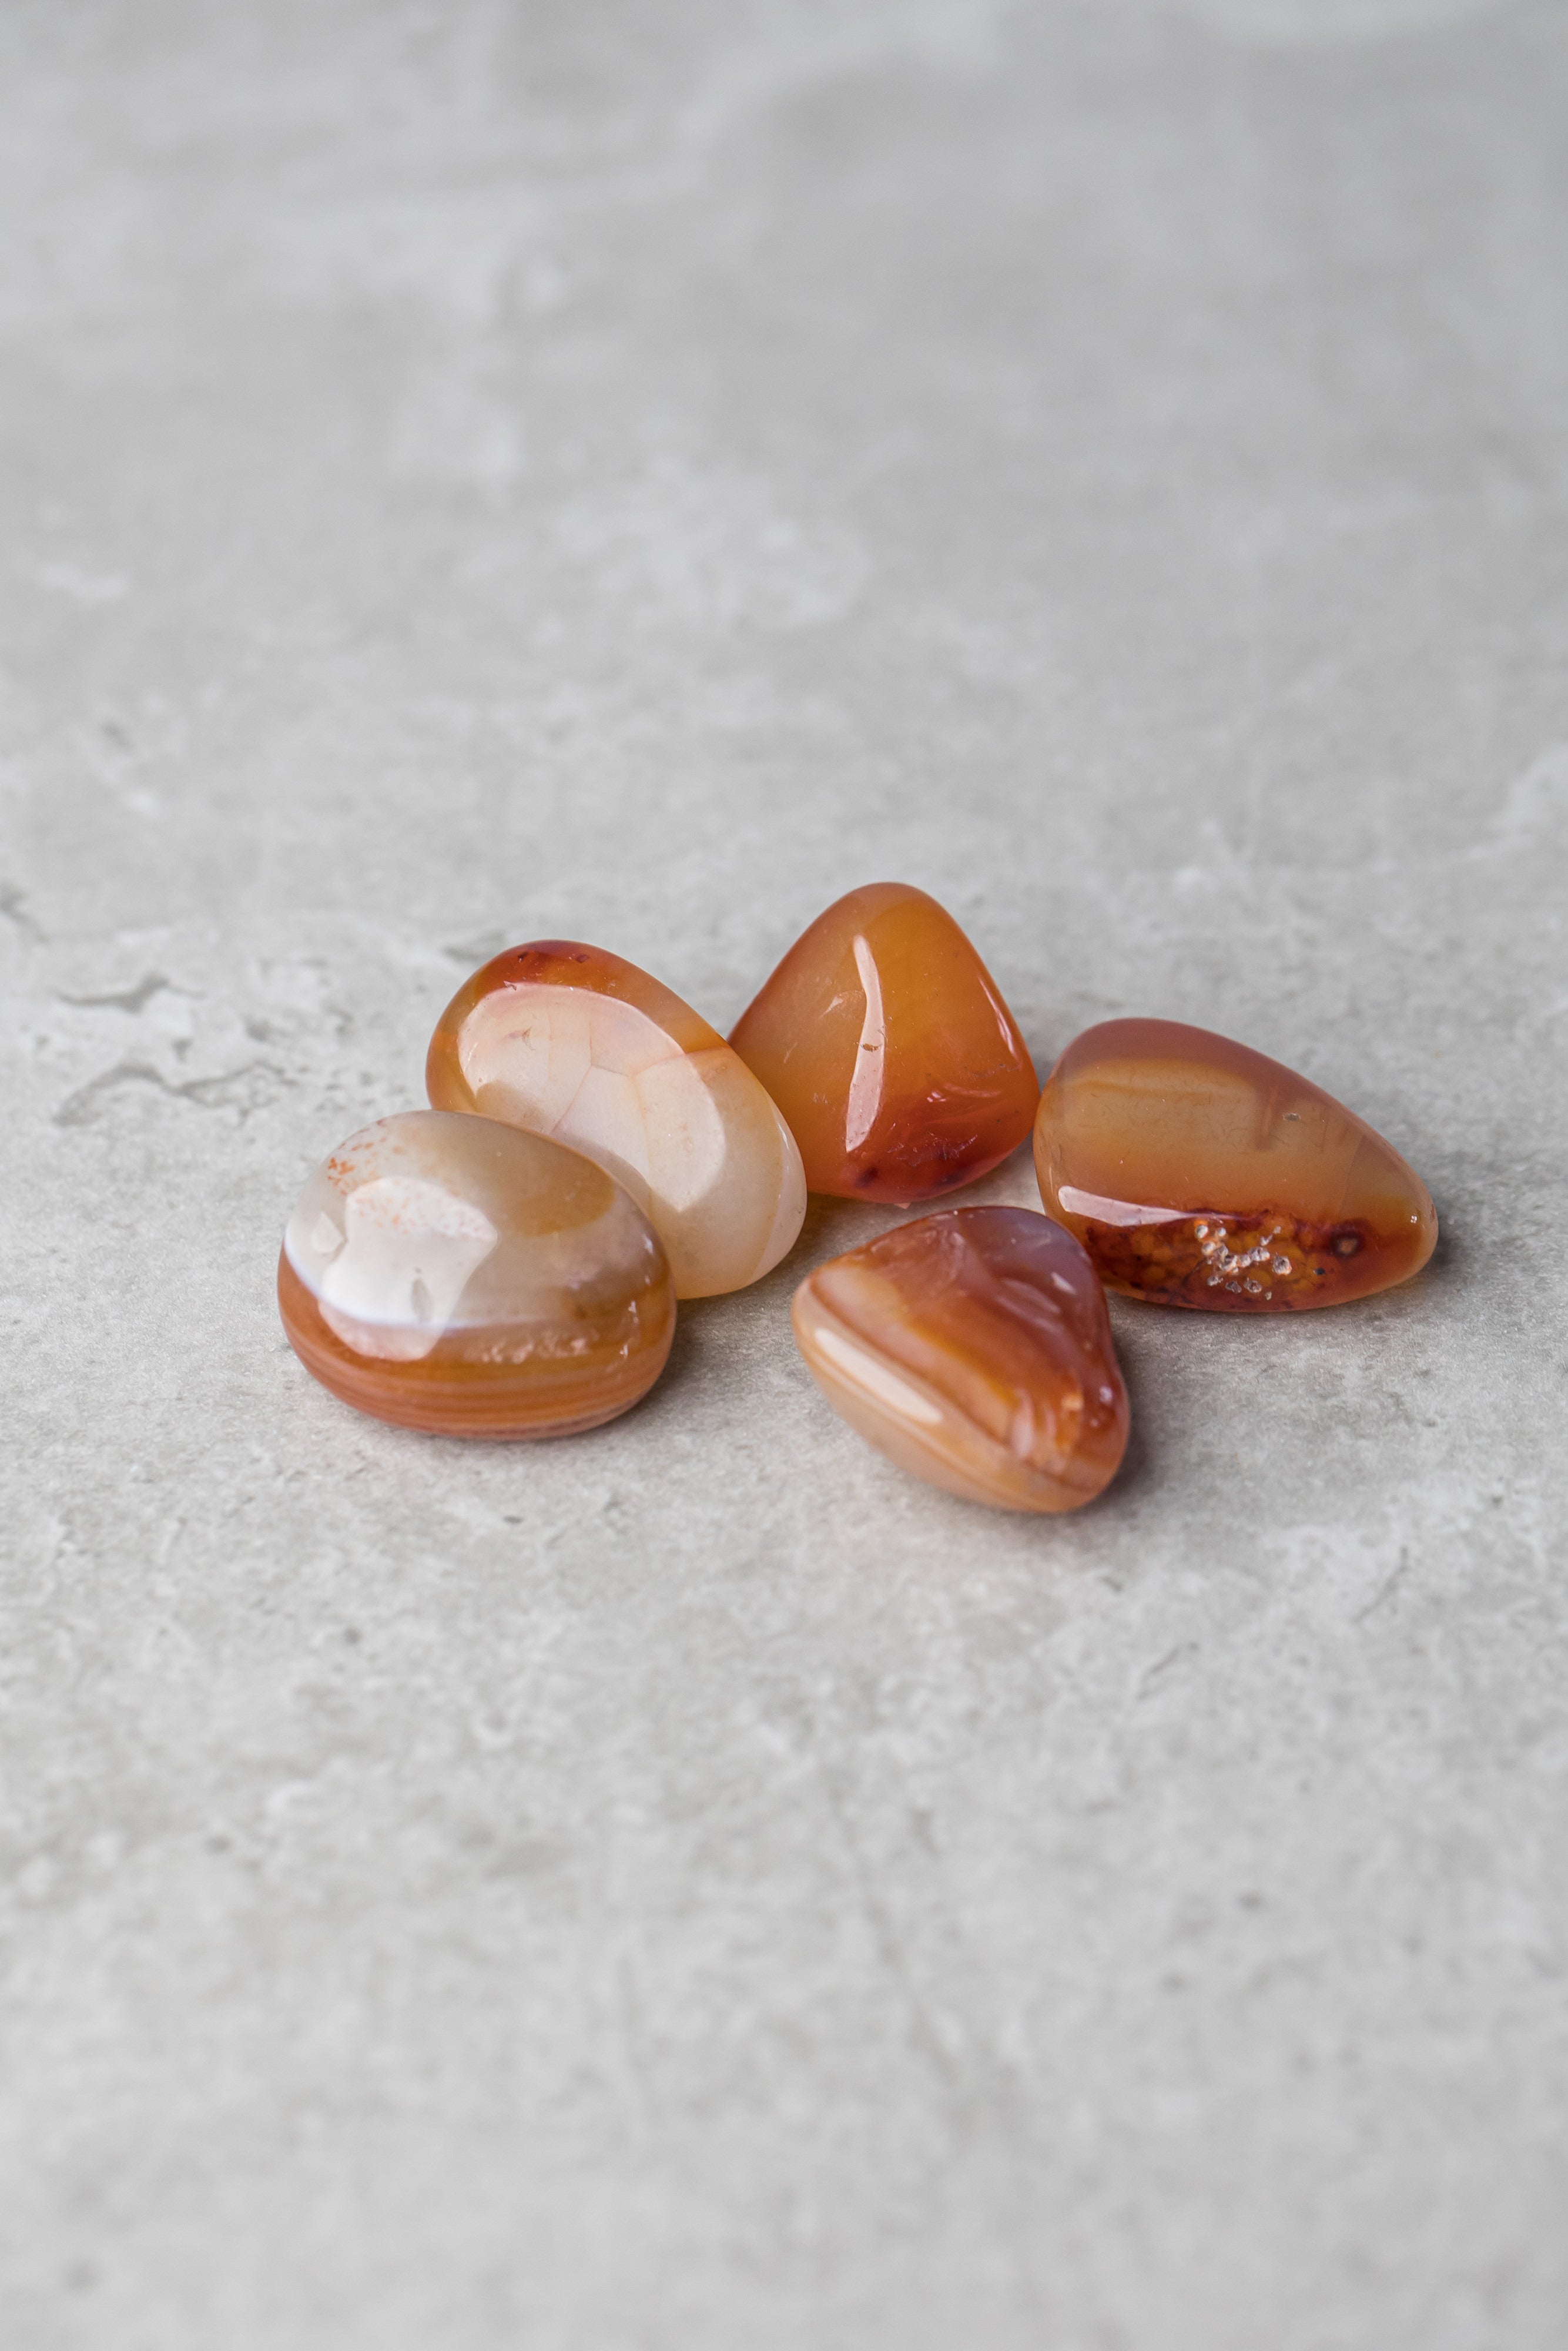 Carnelian - Energising Stone for Motivation and Courage - Everyday Rocks